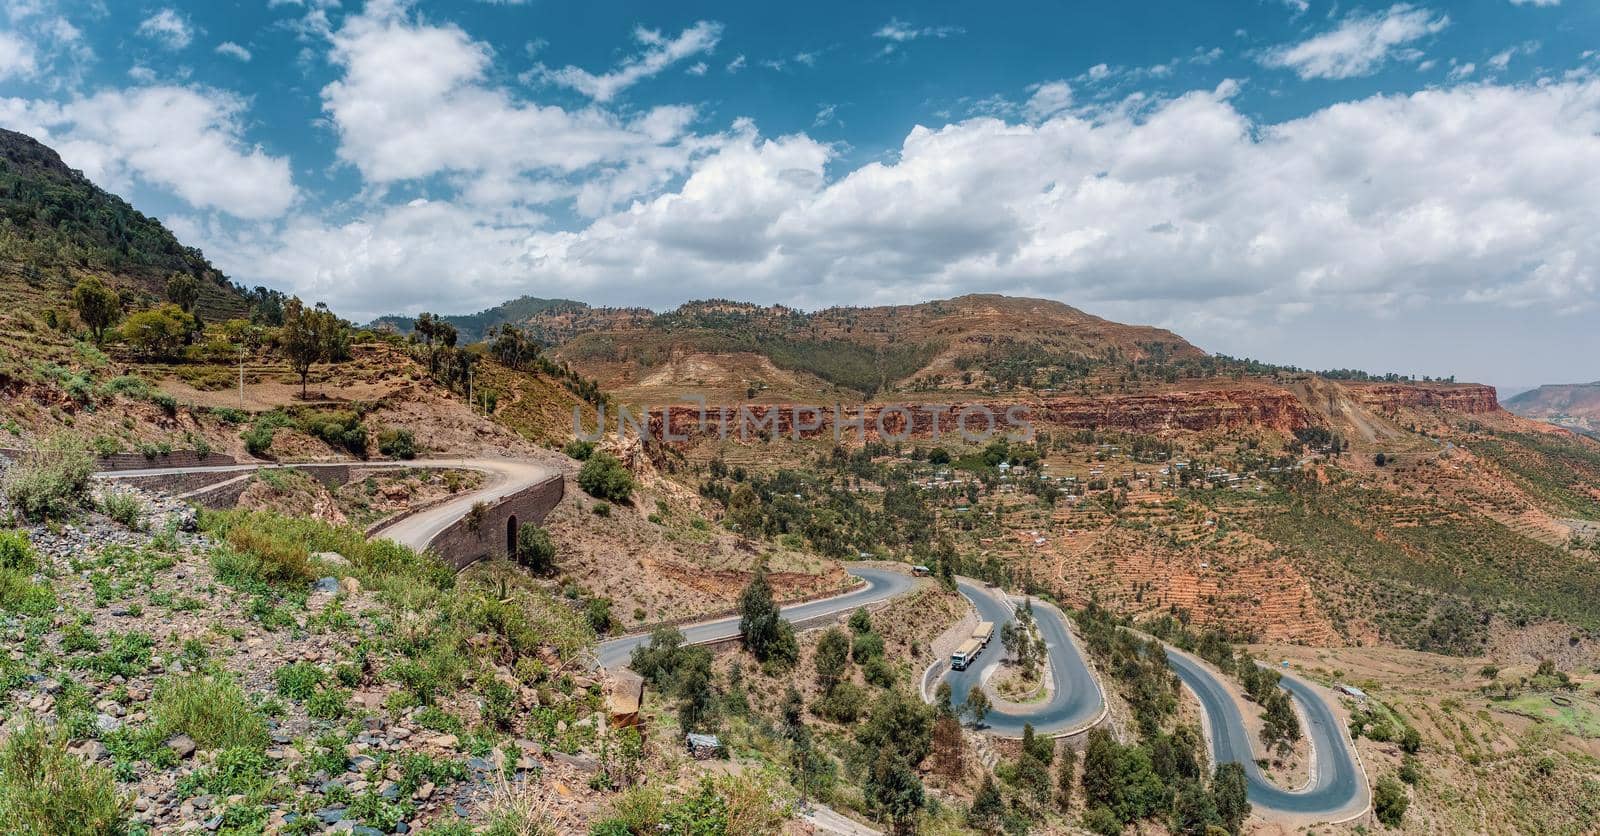 winding road in Semien, Simien Mountains, Ethiopia by artush